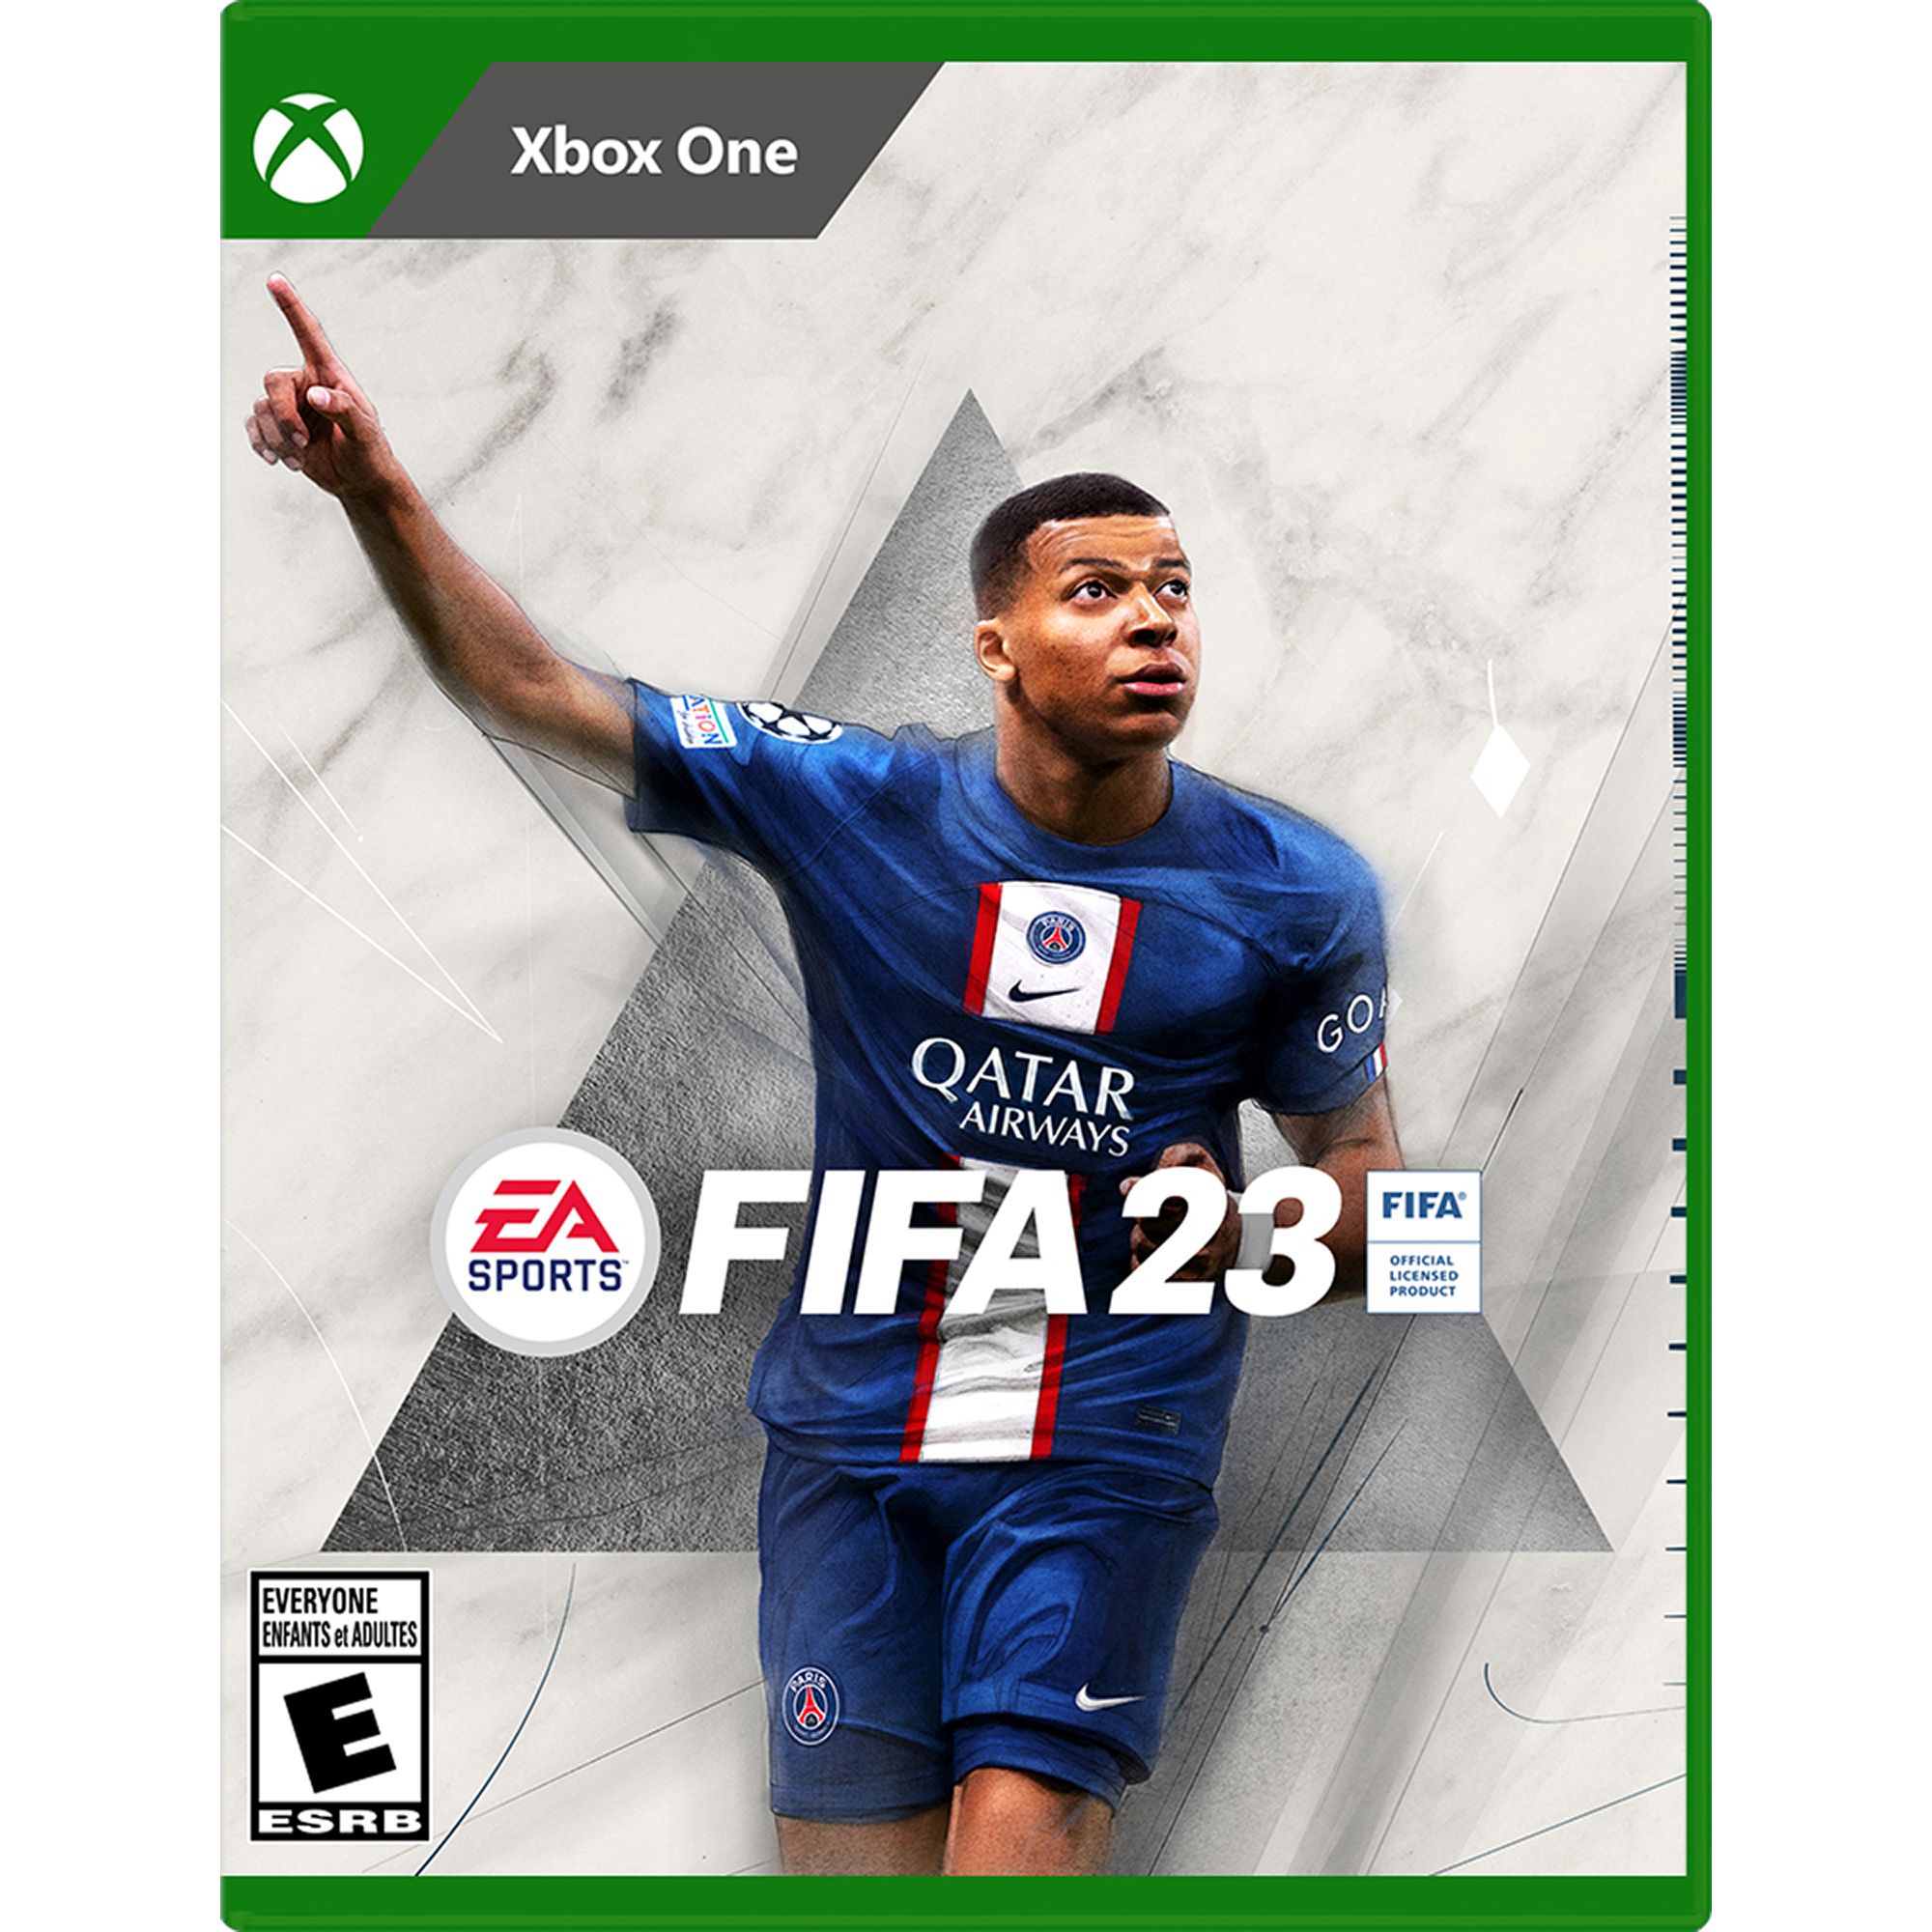 EA Play members will be able to play FIFA 23 a few days early